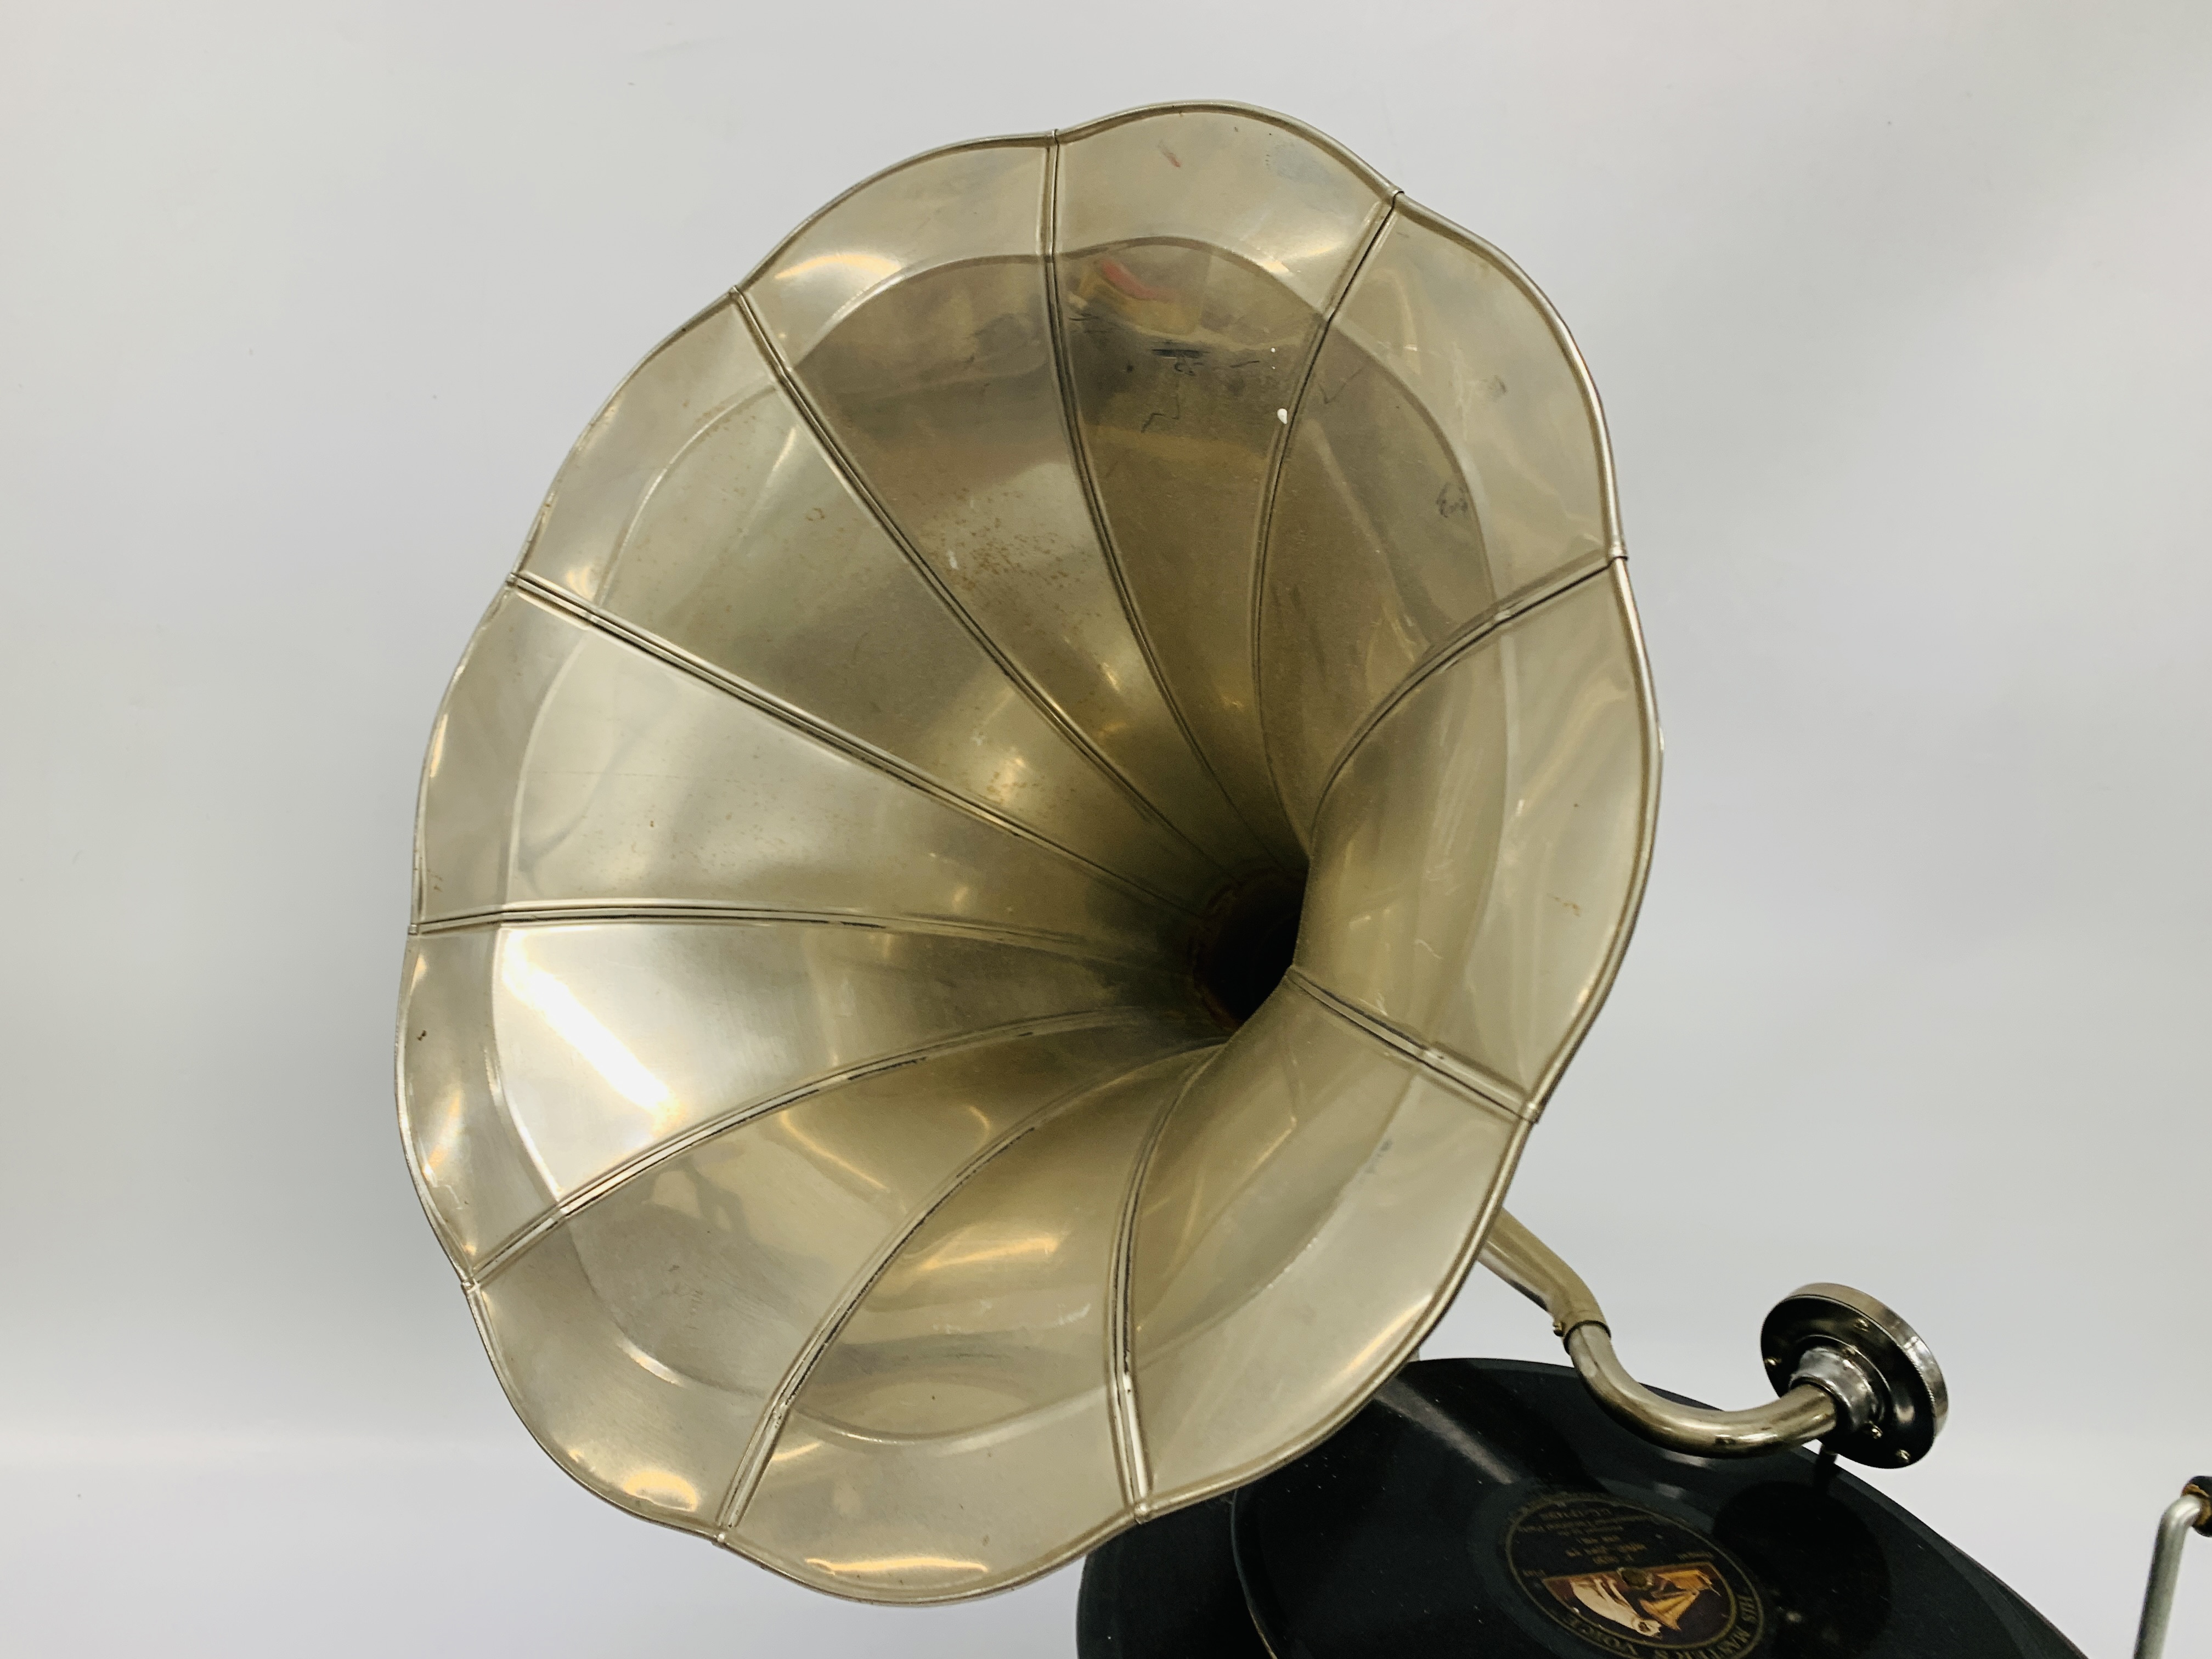 A TABLE TOP WIND UP HORN GRAMOPHONE MARKED "HIS MASTERS VOICE" - Image 5 of 8